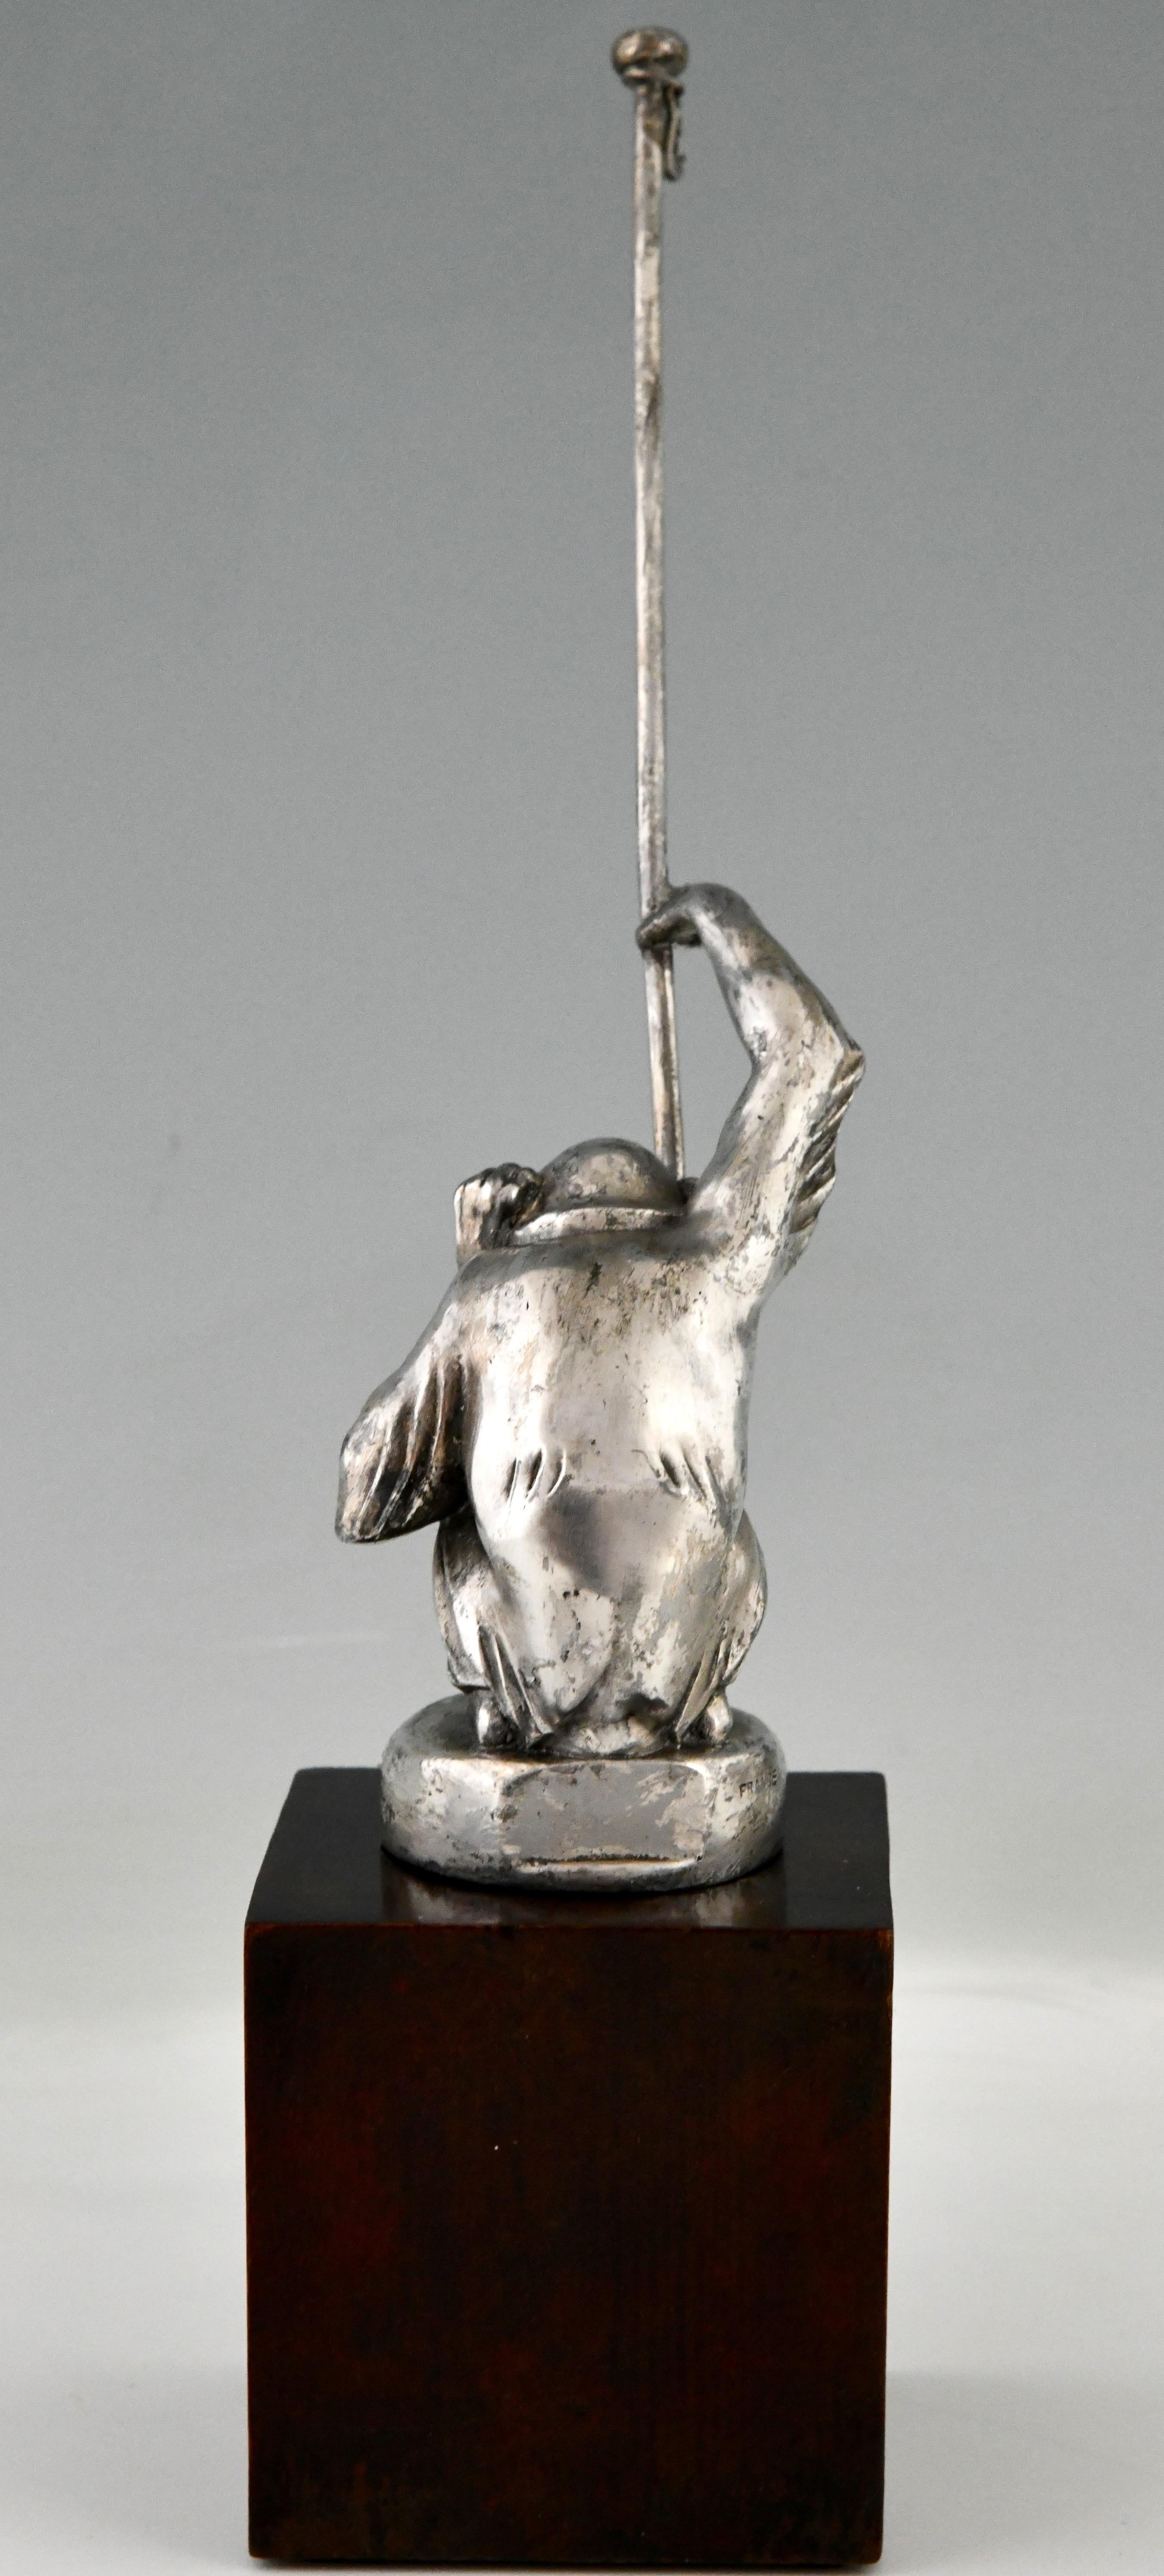 Metal Art Deco Monkey Car Mascot with Flag Pole Boubou by Max Le Verrier France 1920 For Sale